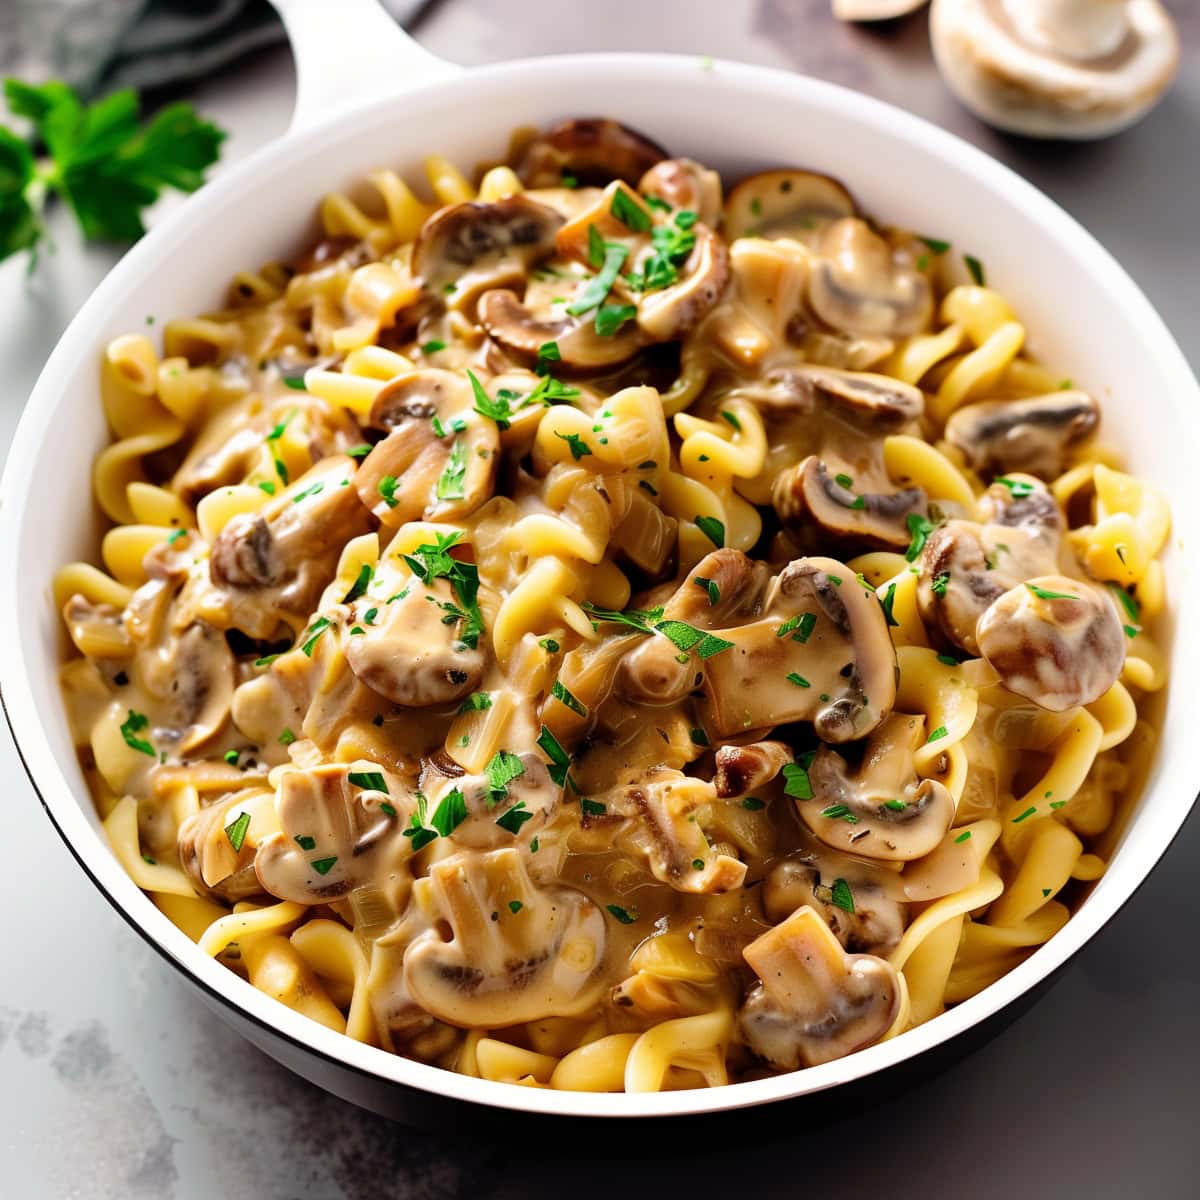 A skillet filled with freshly cooked mushroom stroganoff.